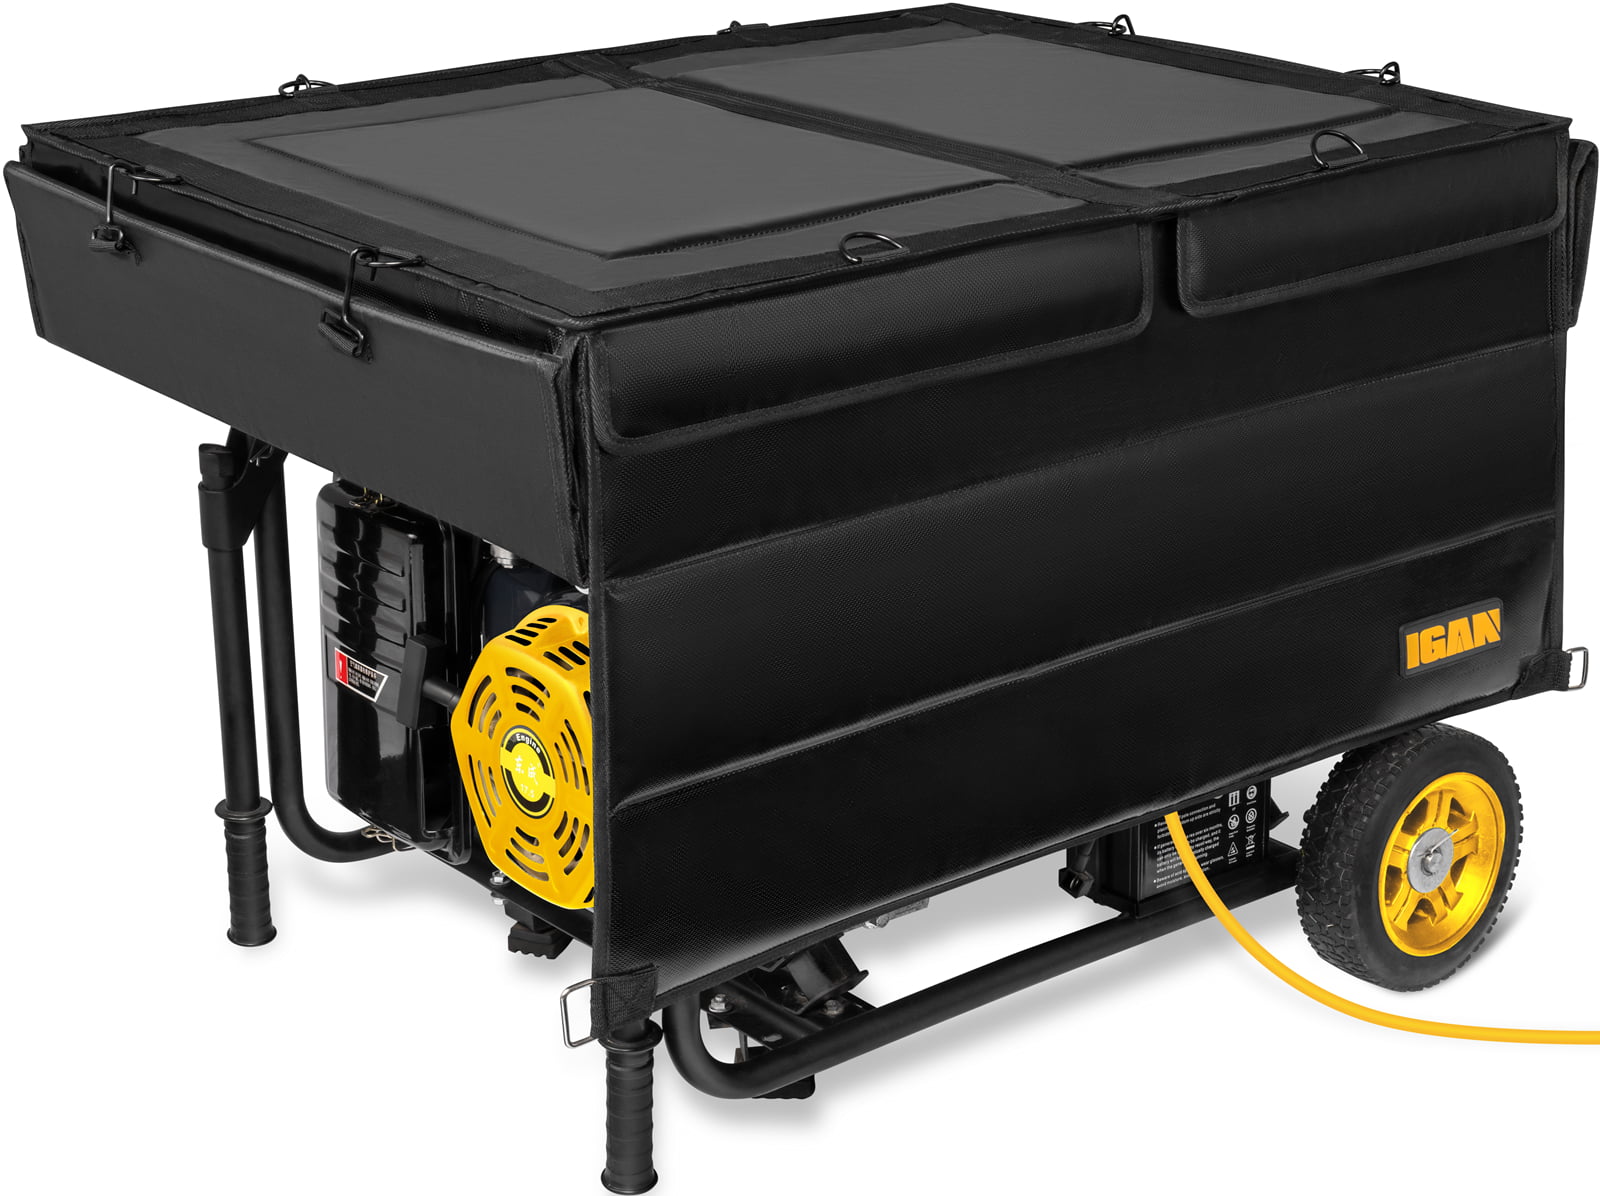 Classic Accessories Generator Cover Fits Up To 22.5"L x 16.5"W x 16"H 